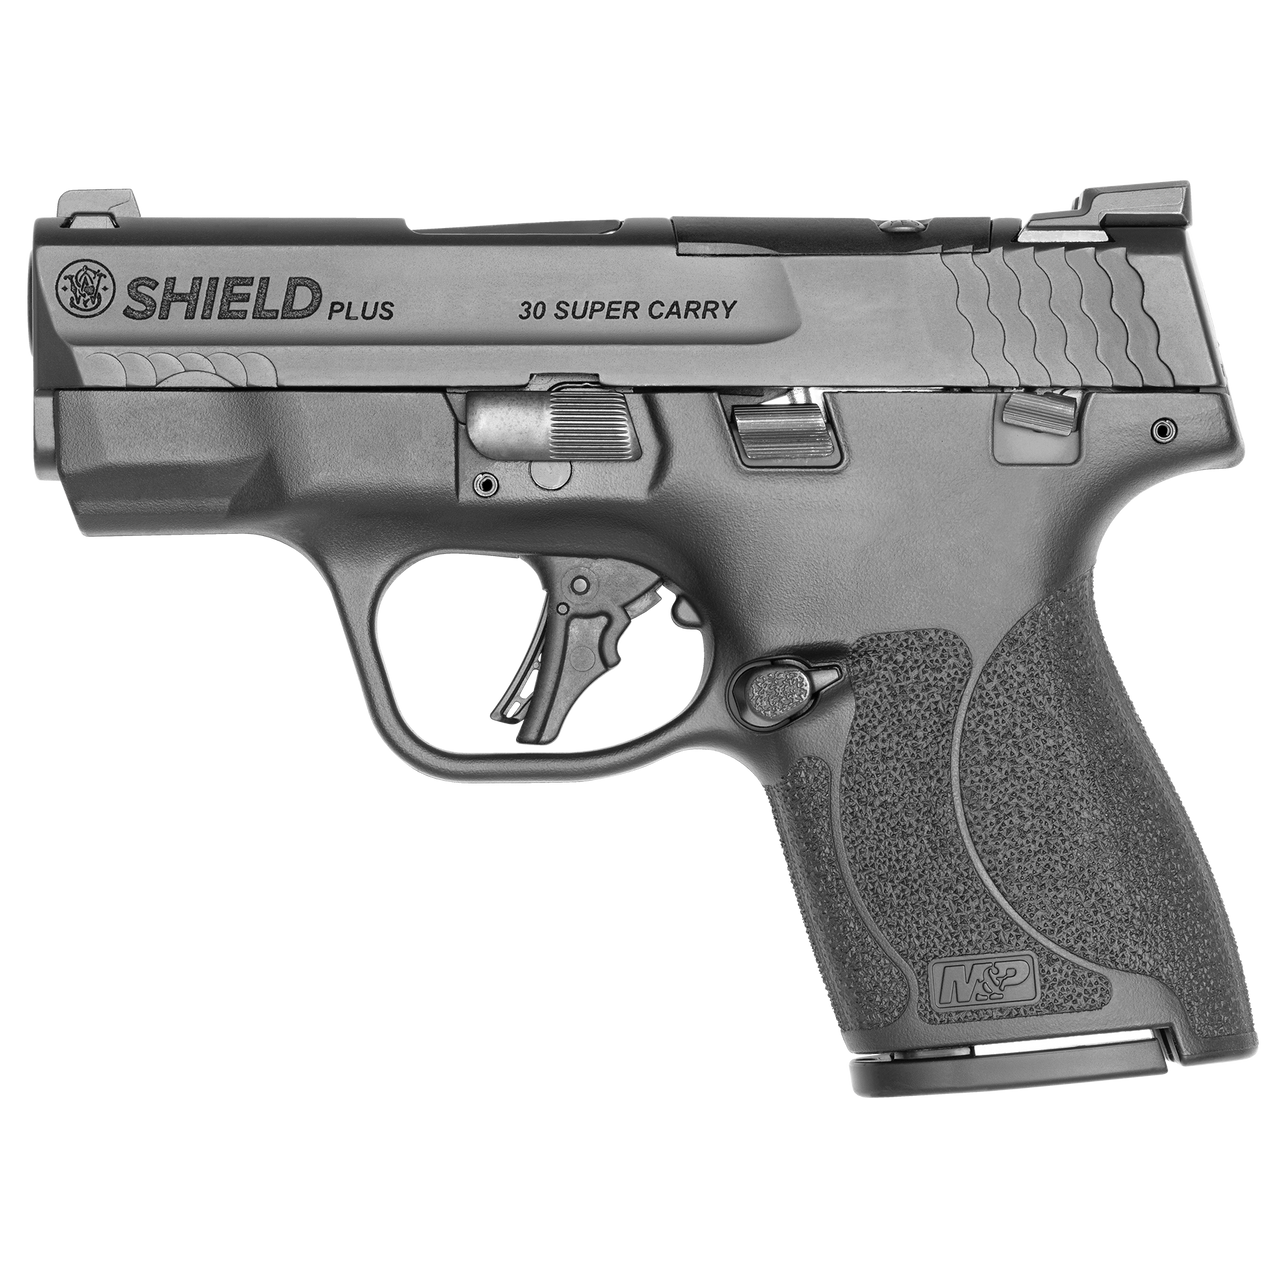 Buy S&W Shield Plus OR Thumb Safety 30 Super Carry Pistol Online